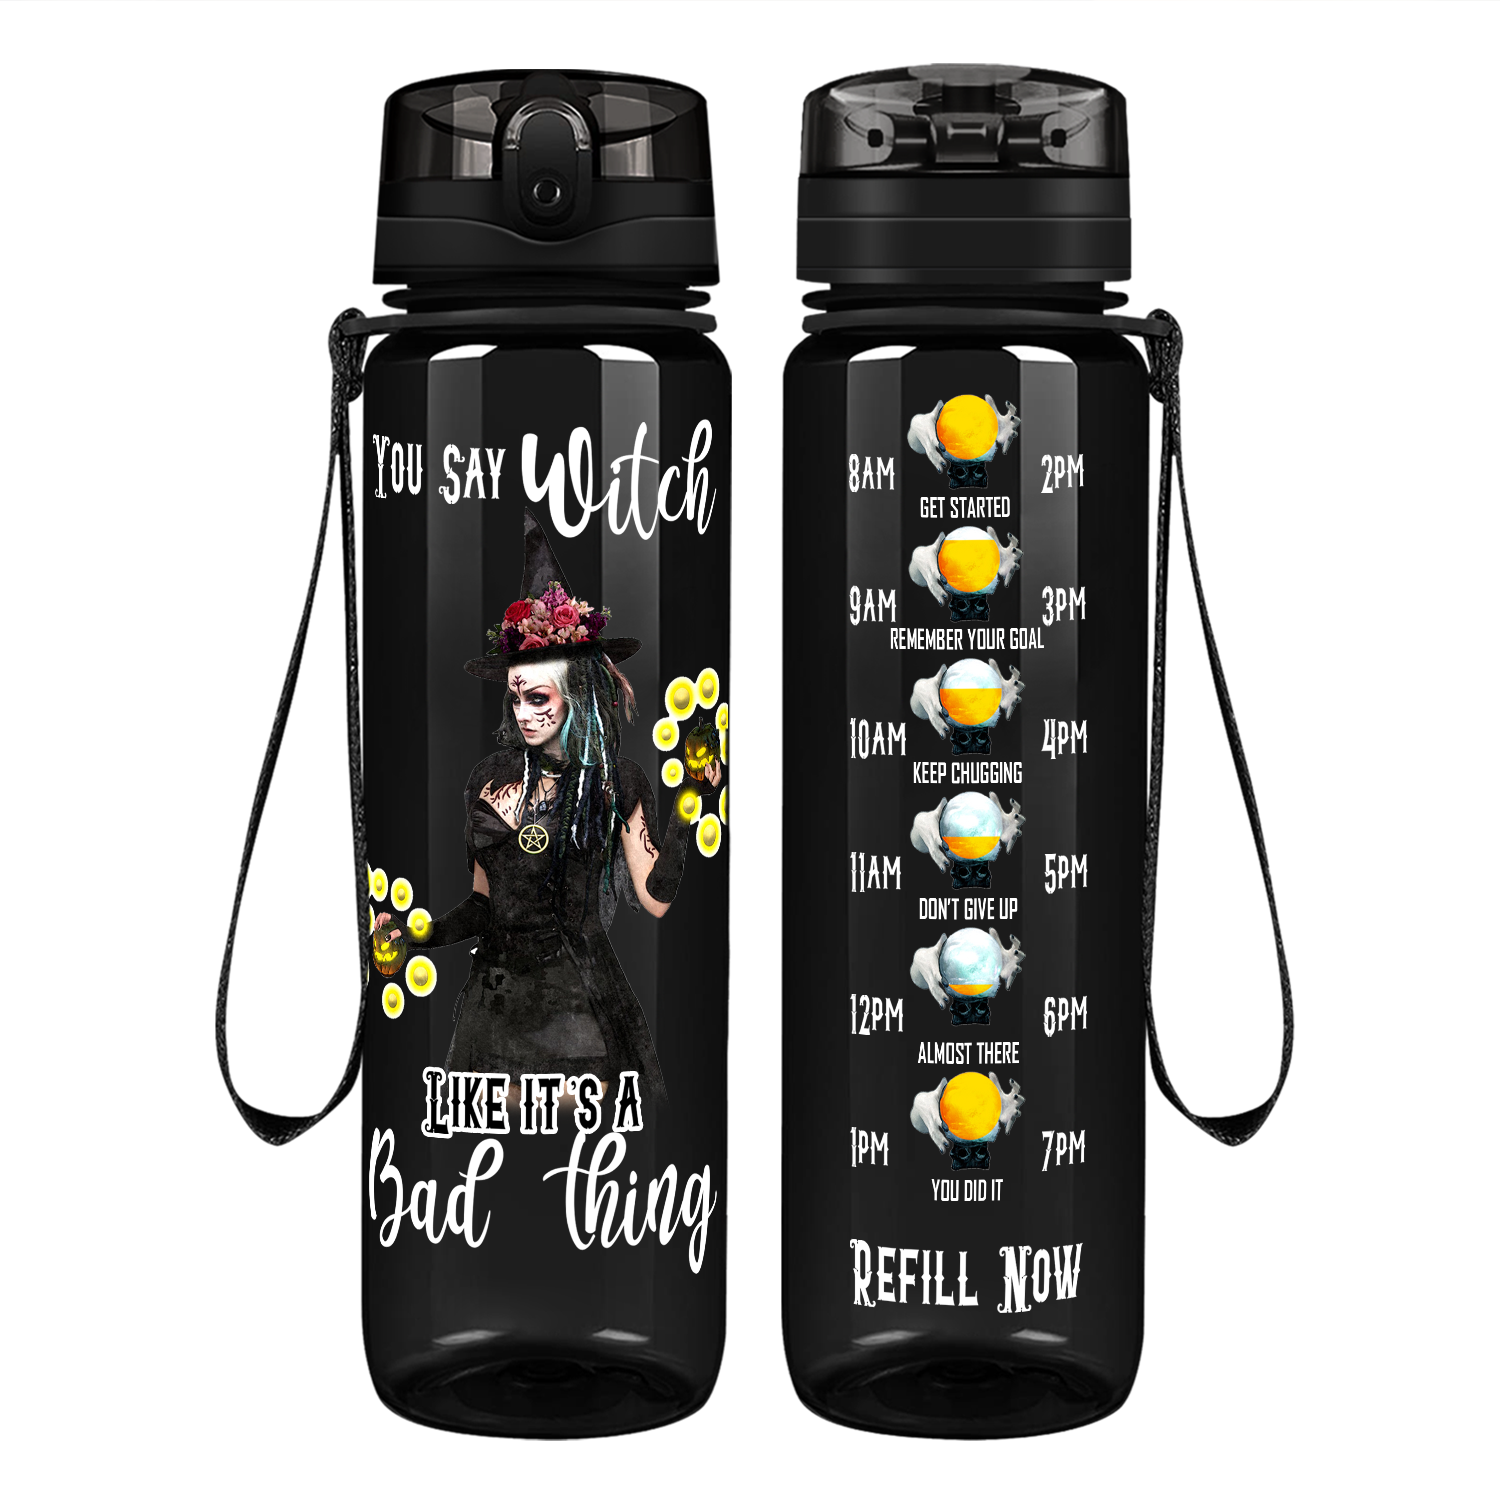 You Said Witch Like it’s a Bad Thing on 32 oz Motivational Tracking Water Bottle